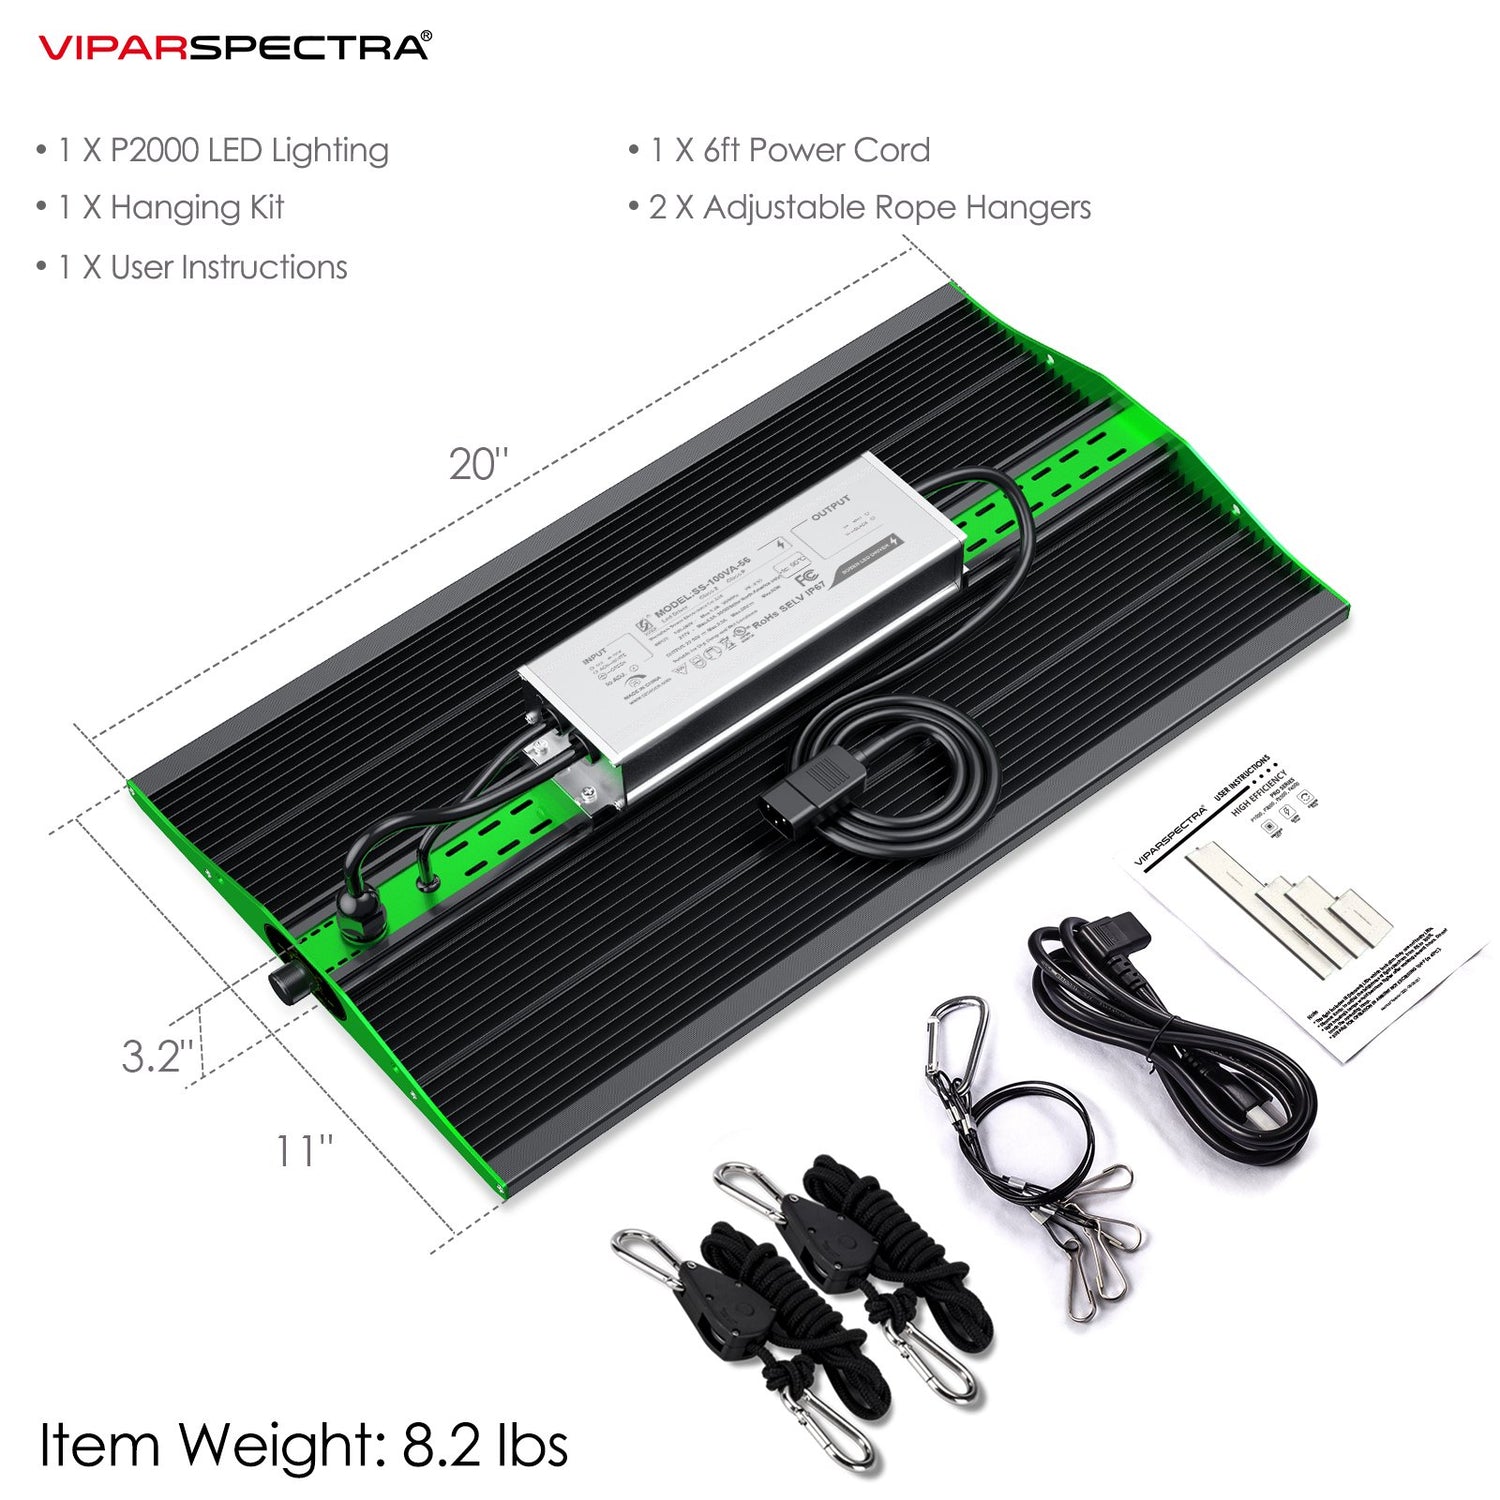 viparspectra-P2000-package